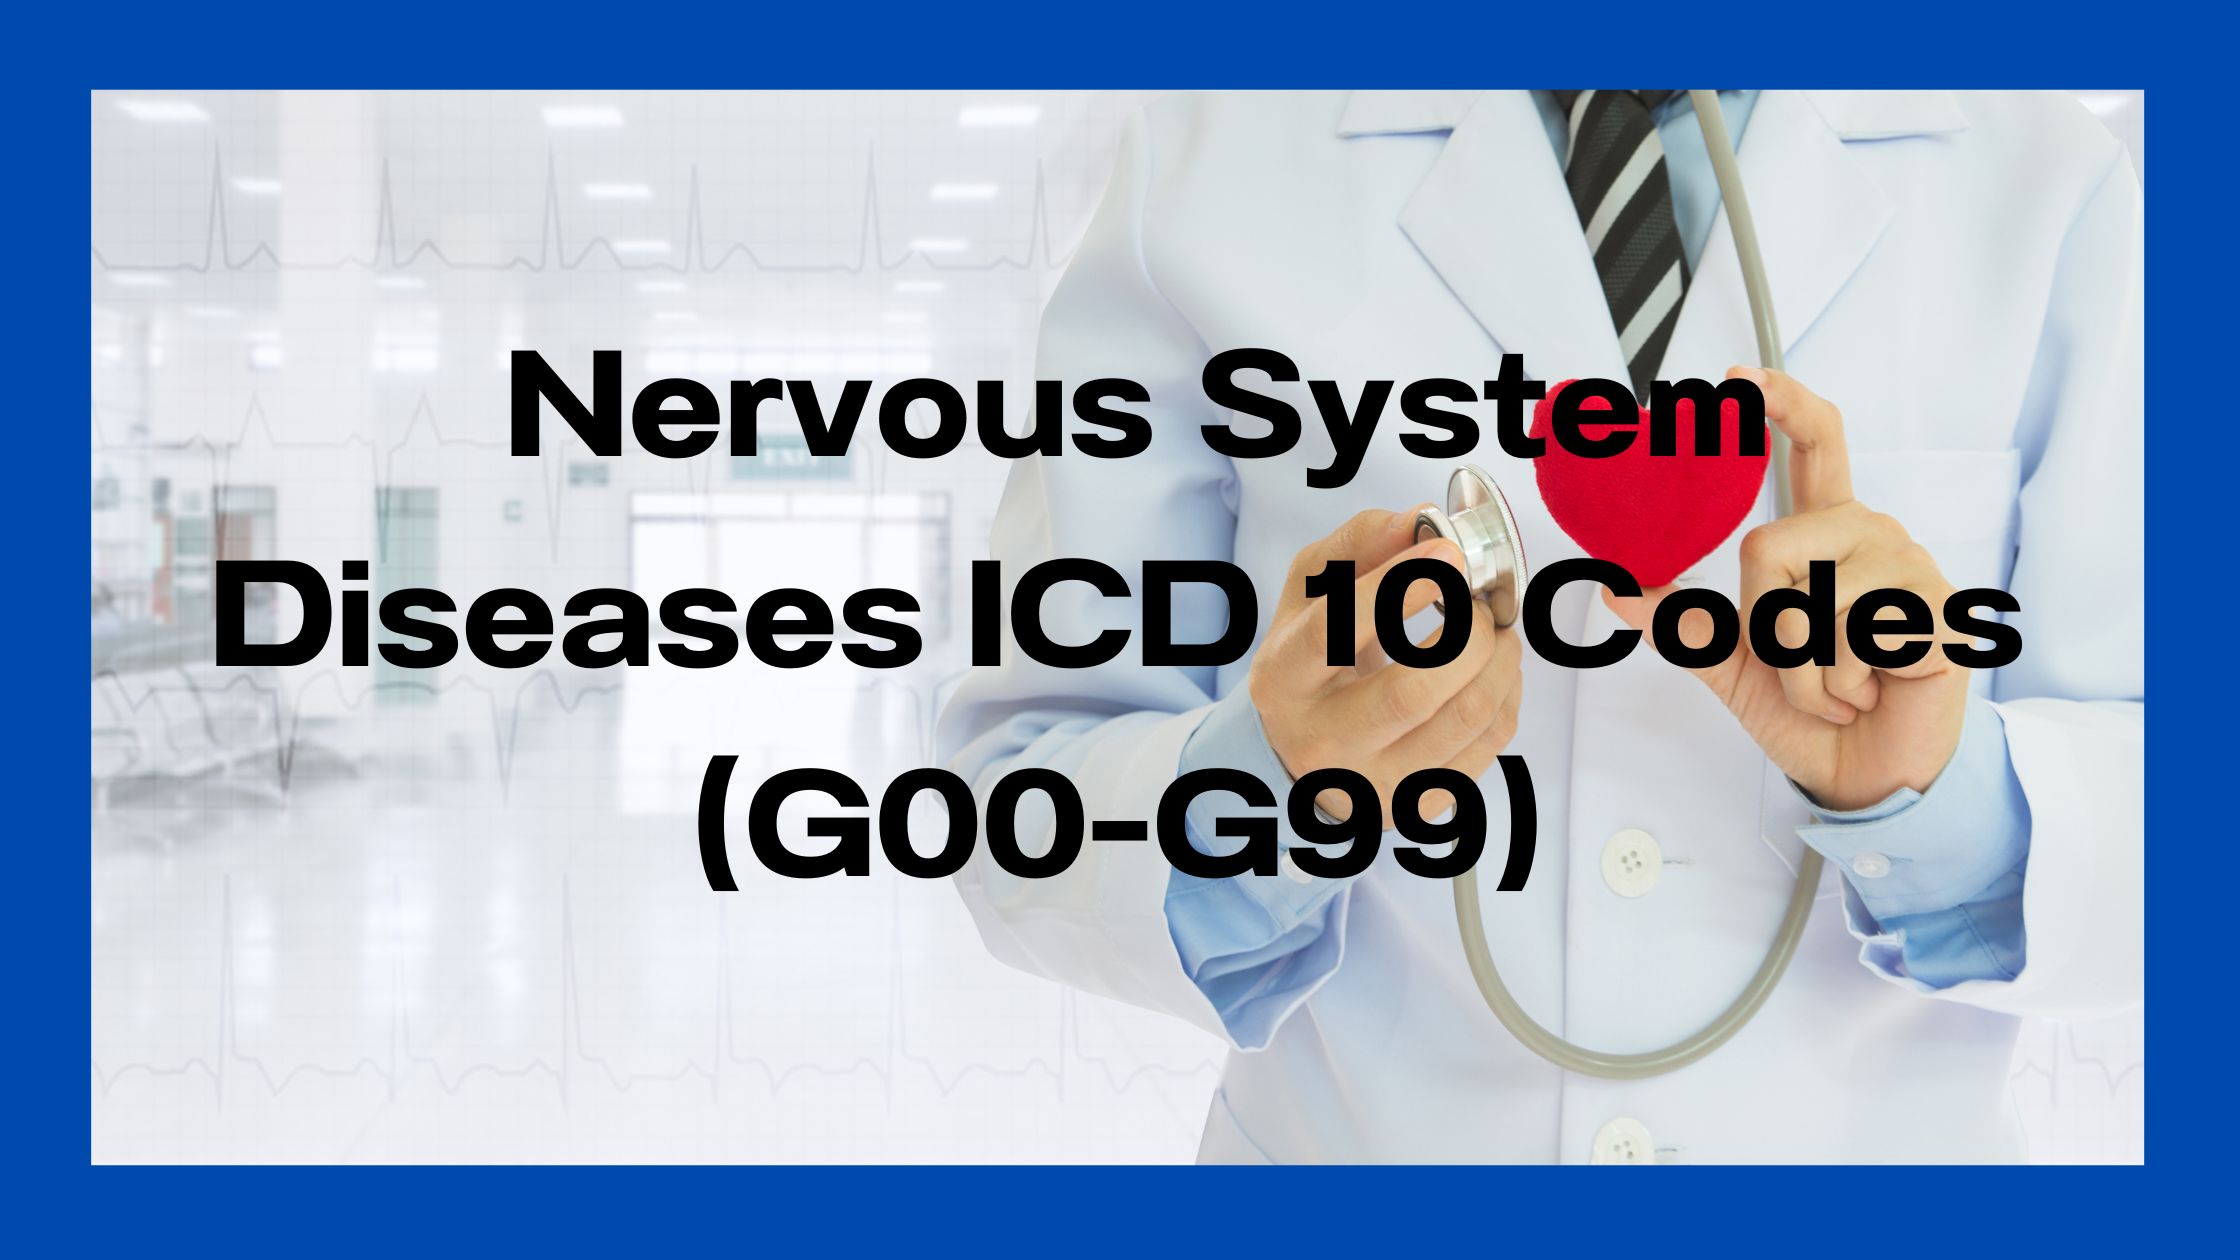 Nervous System ICD-10 codes